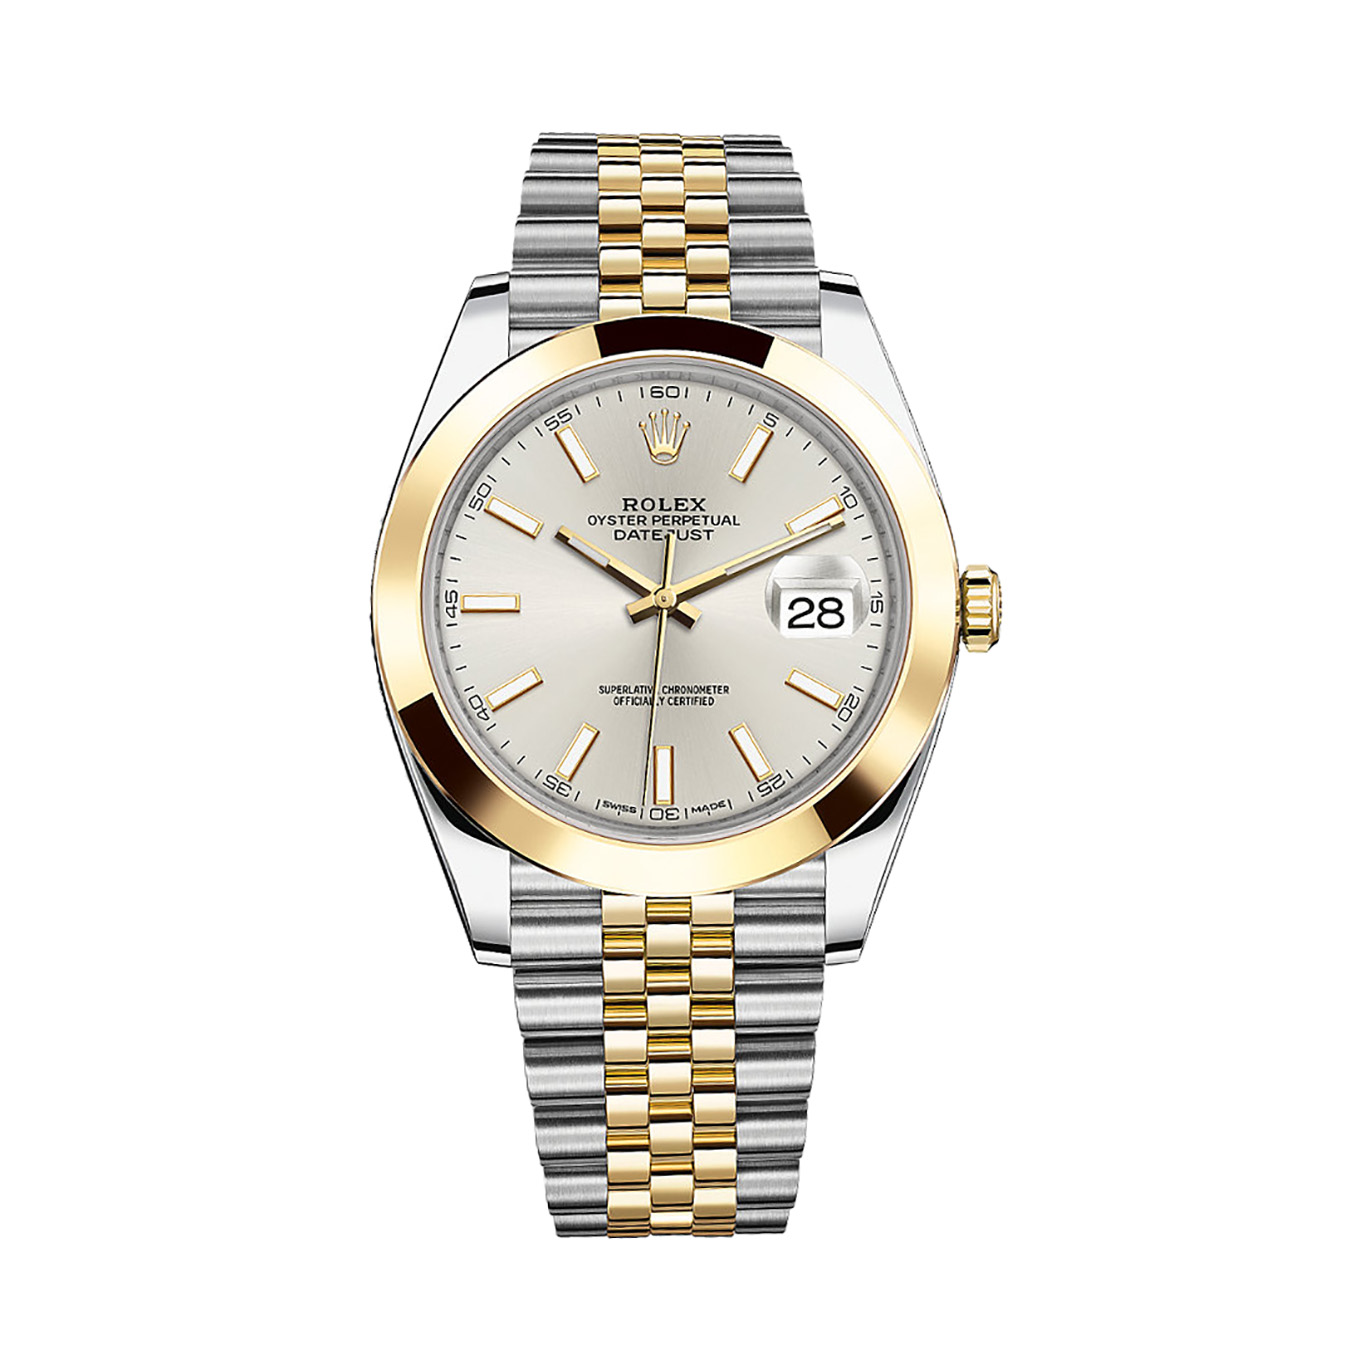 Datejust 41 126303 Gold & Stainless Steel Watch (Silver)